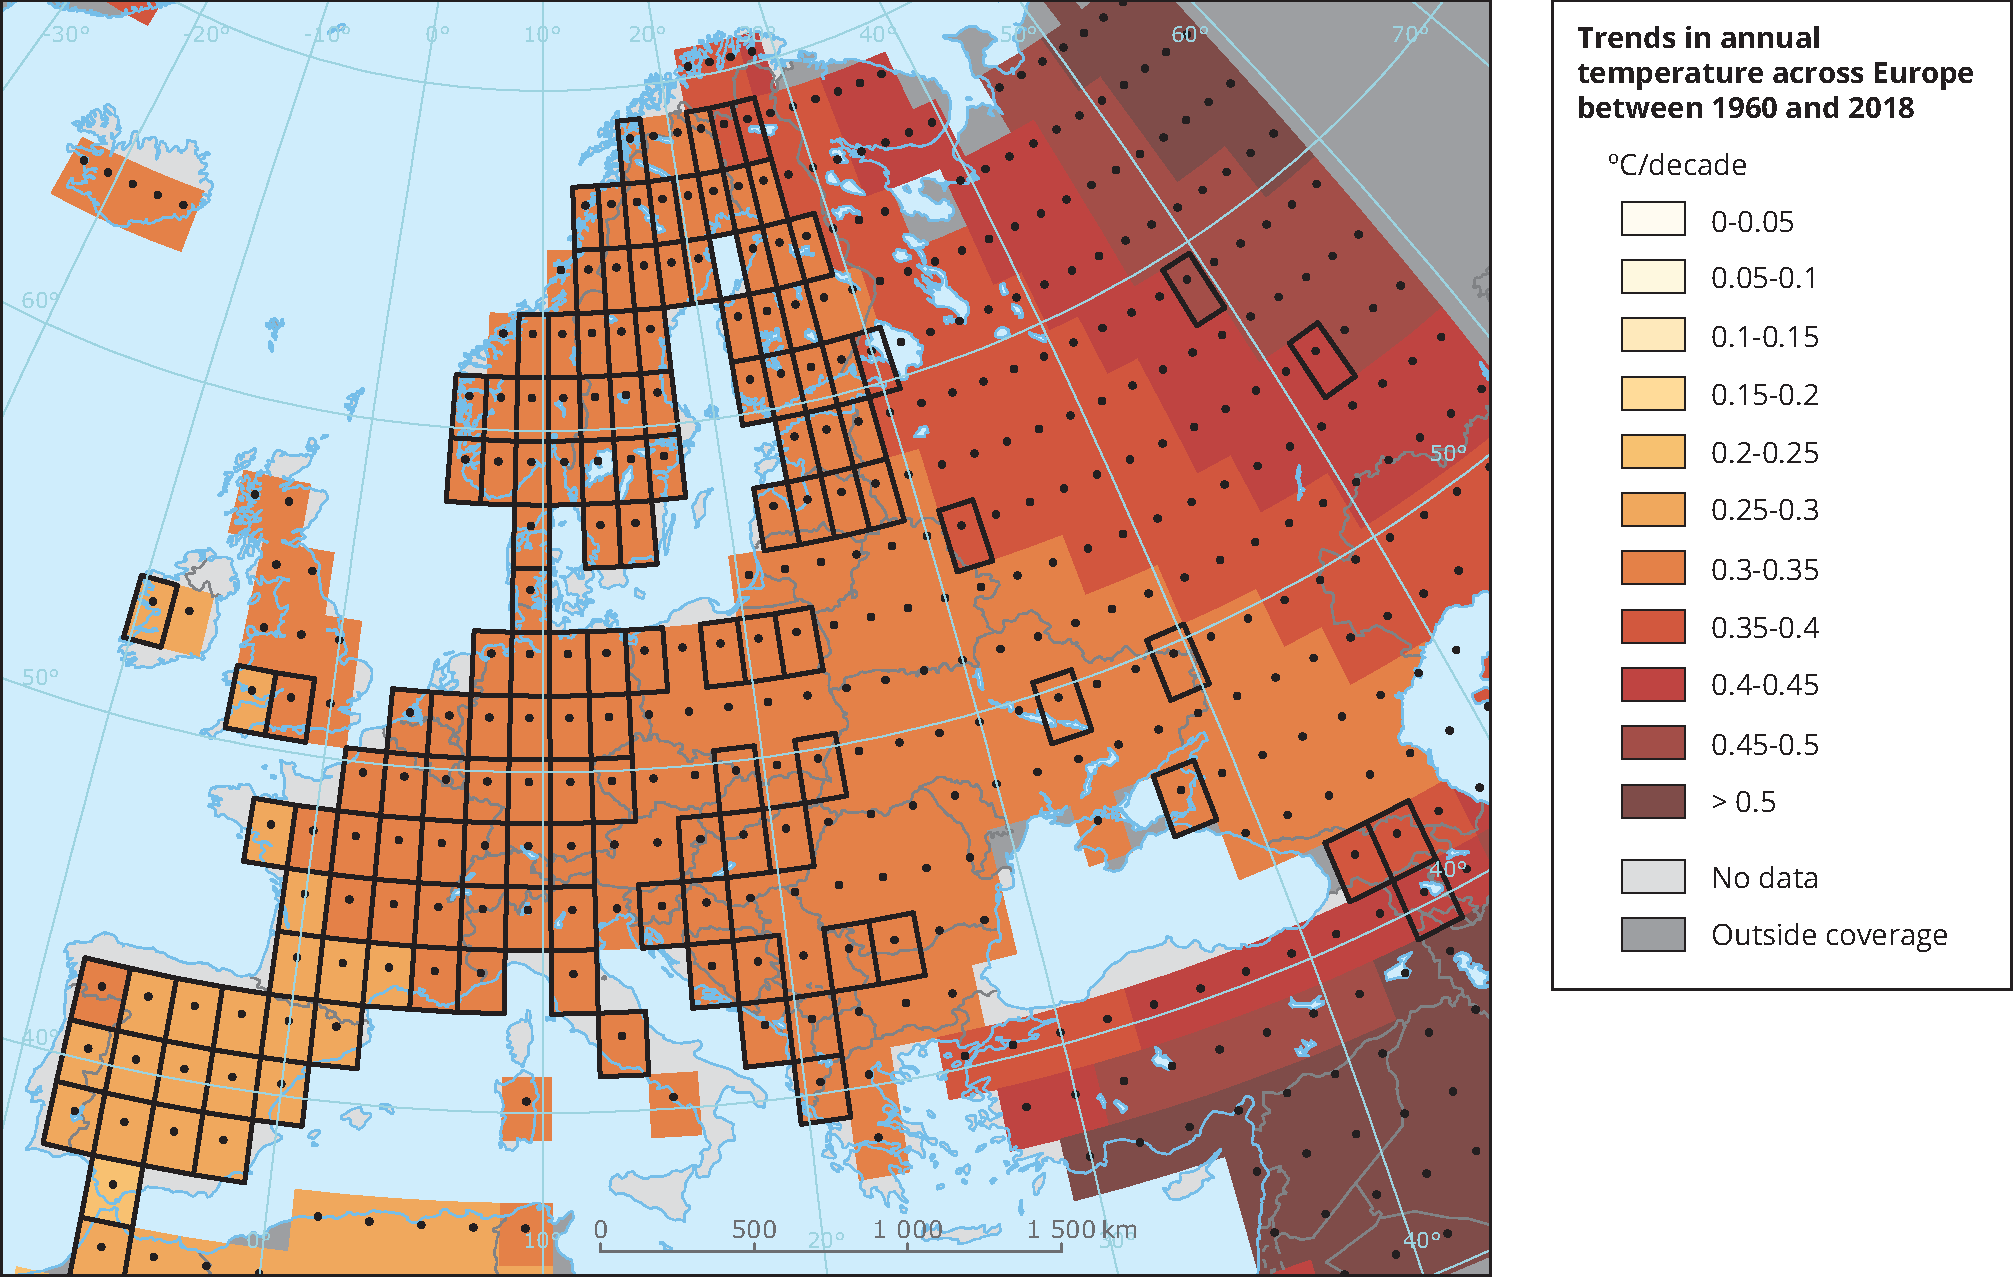 Trends in annual temperature across Europe between 1960 and 2018